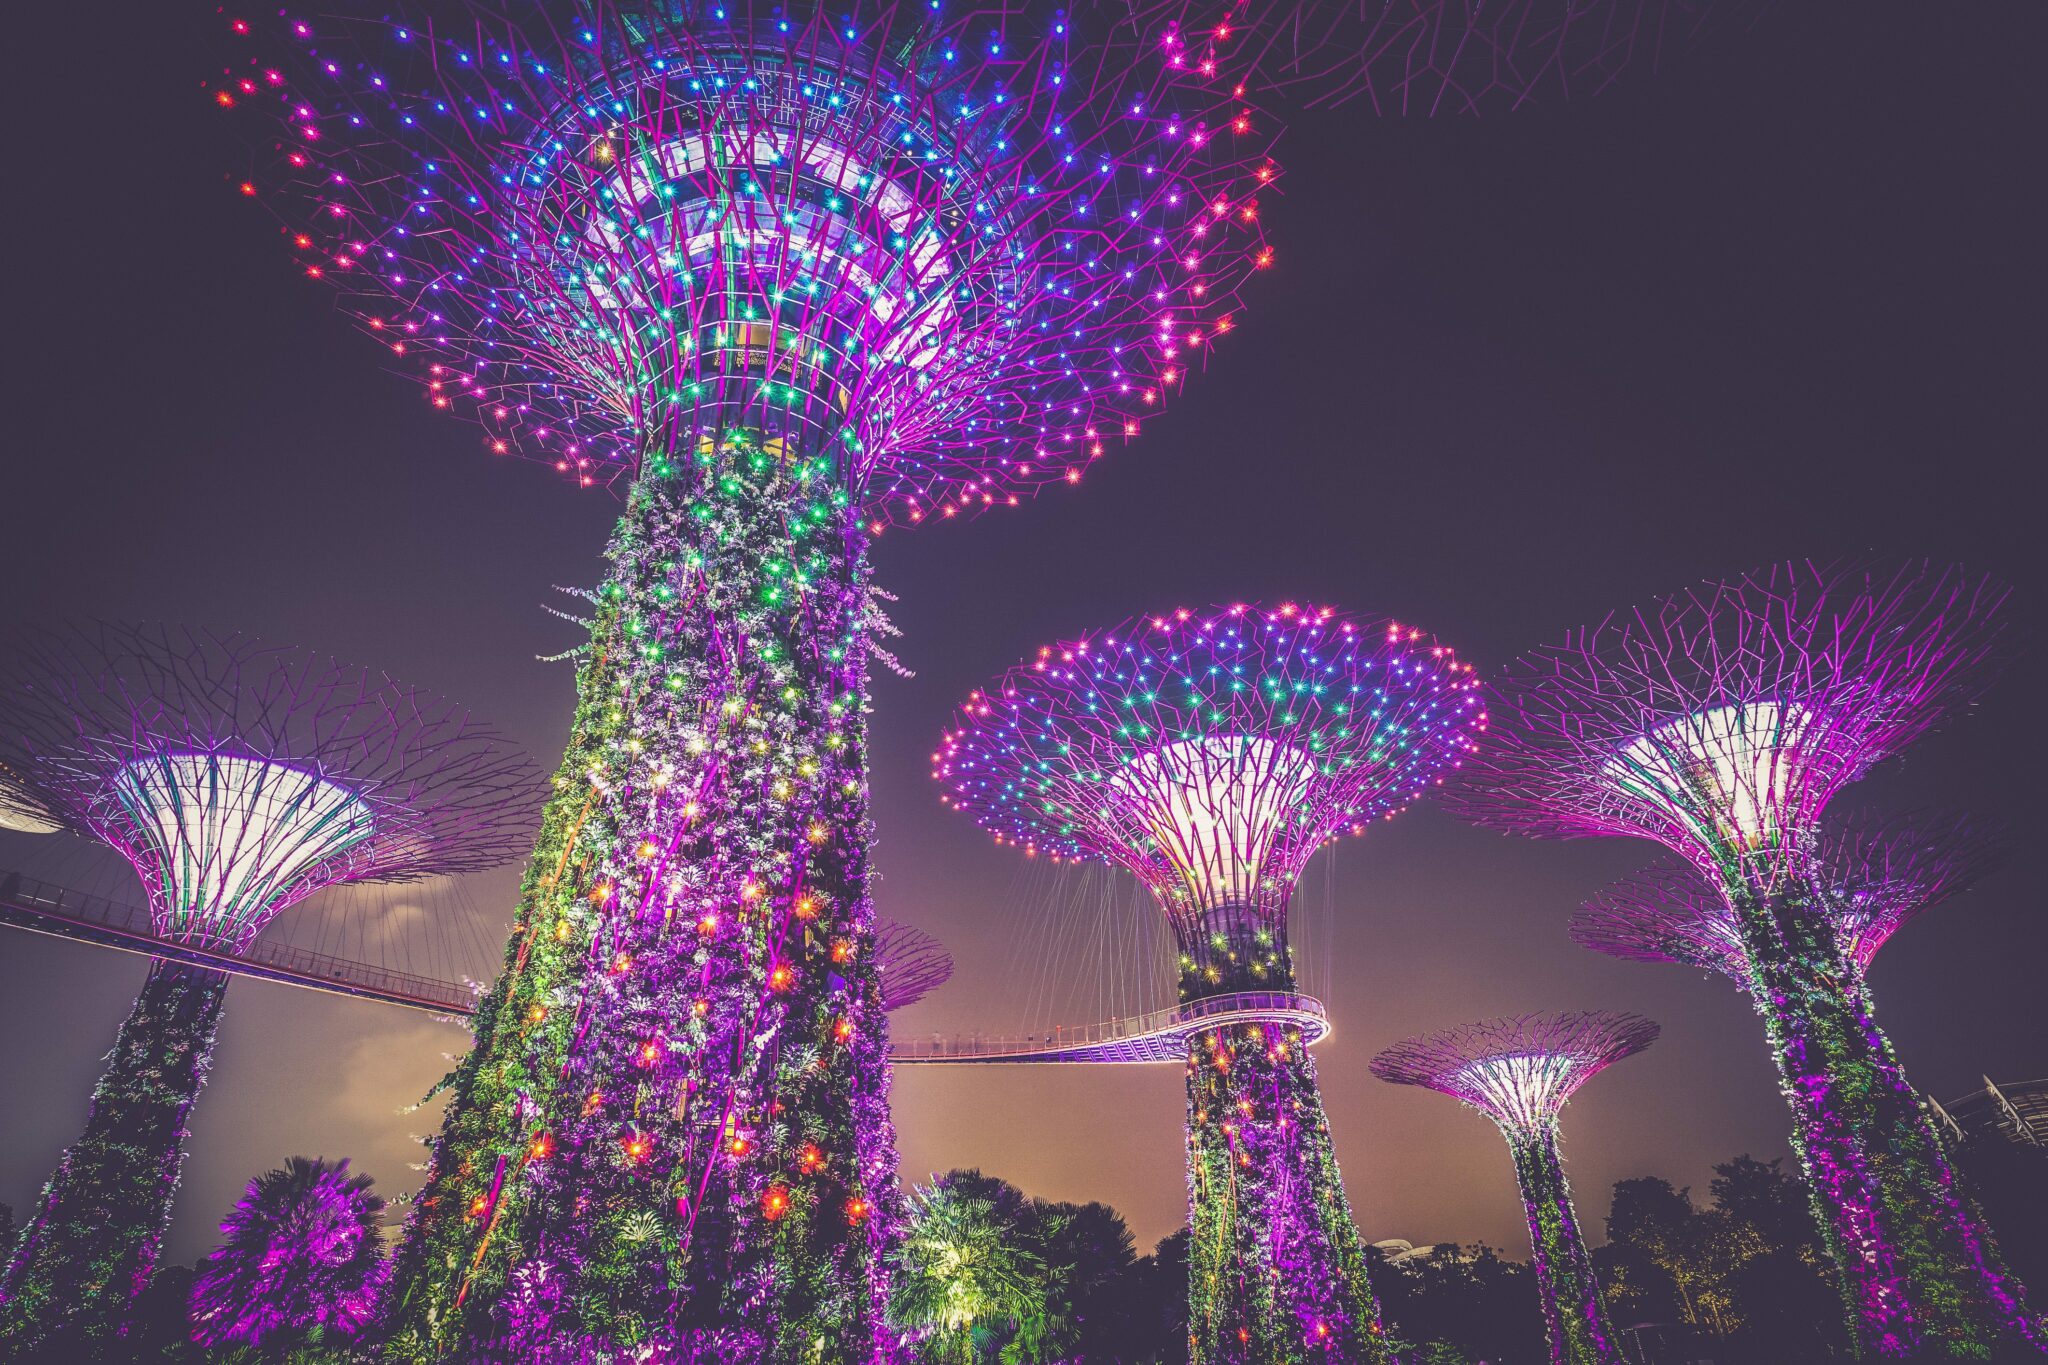 Gardens by the bay at night in singapore